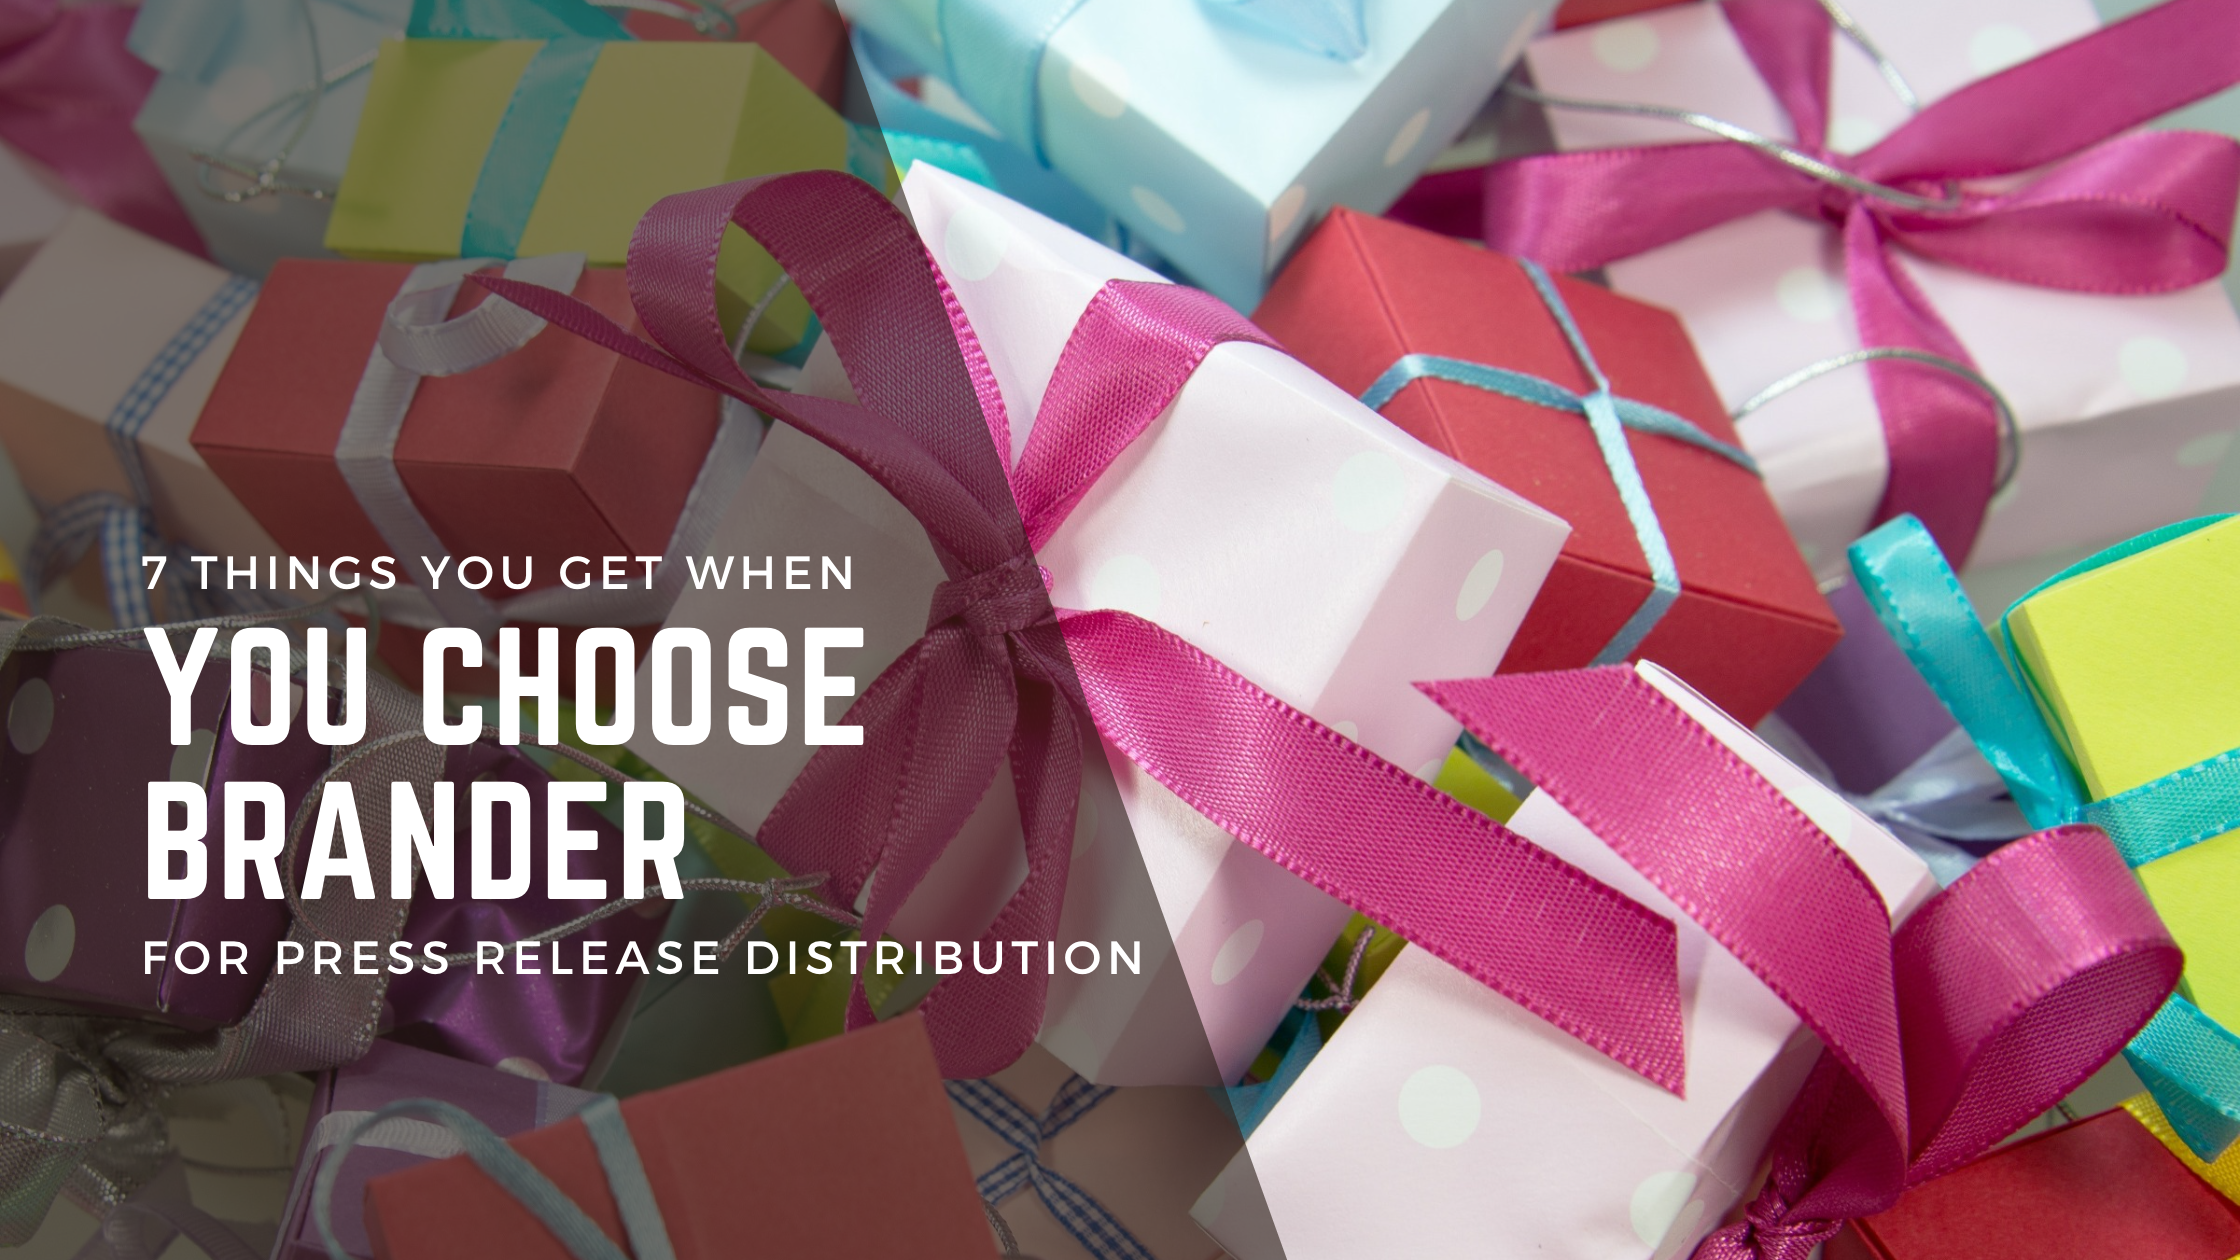 7 Things You Get When You Choose Brander for Press Release Distribution